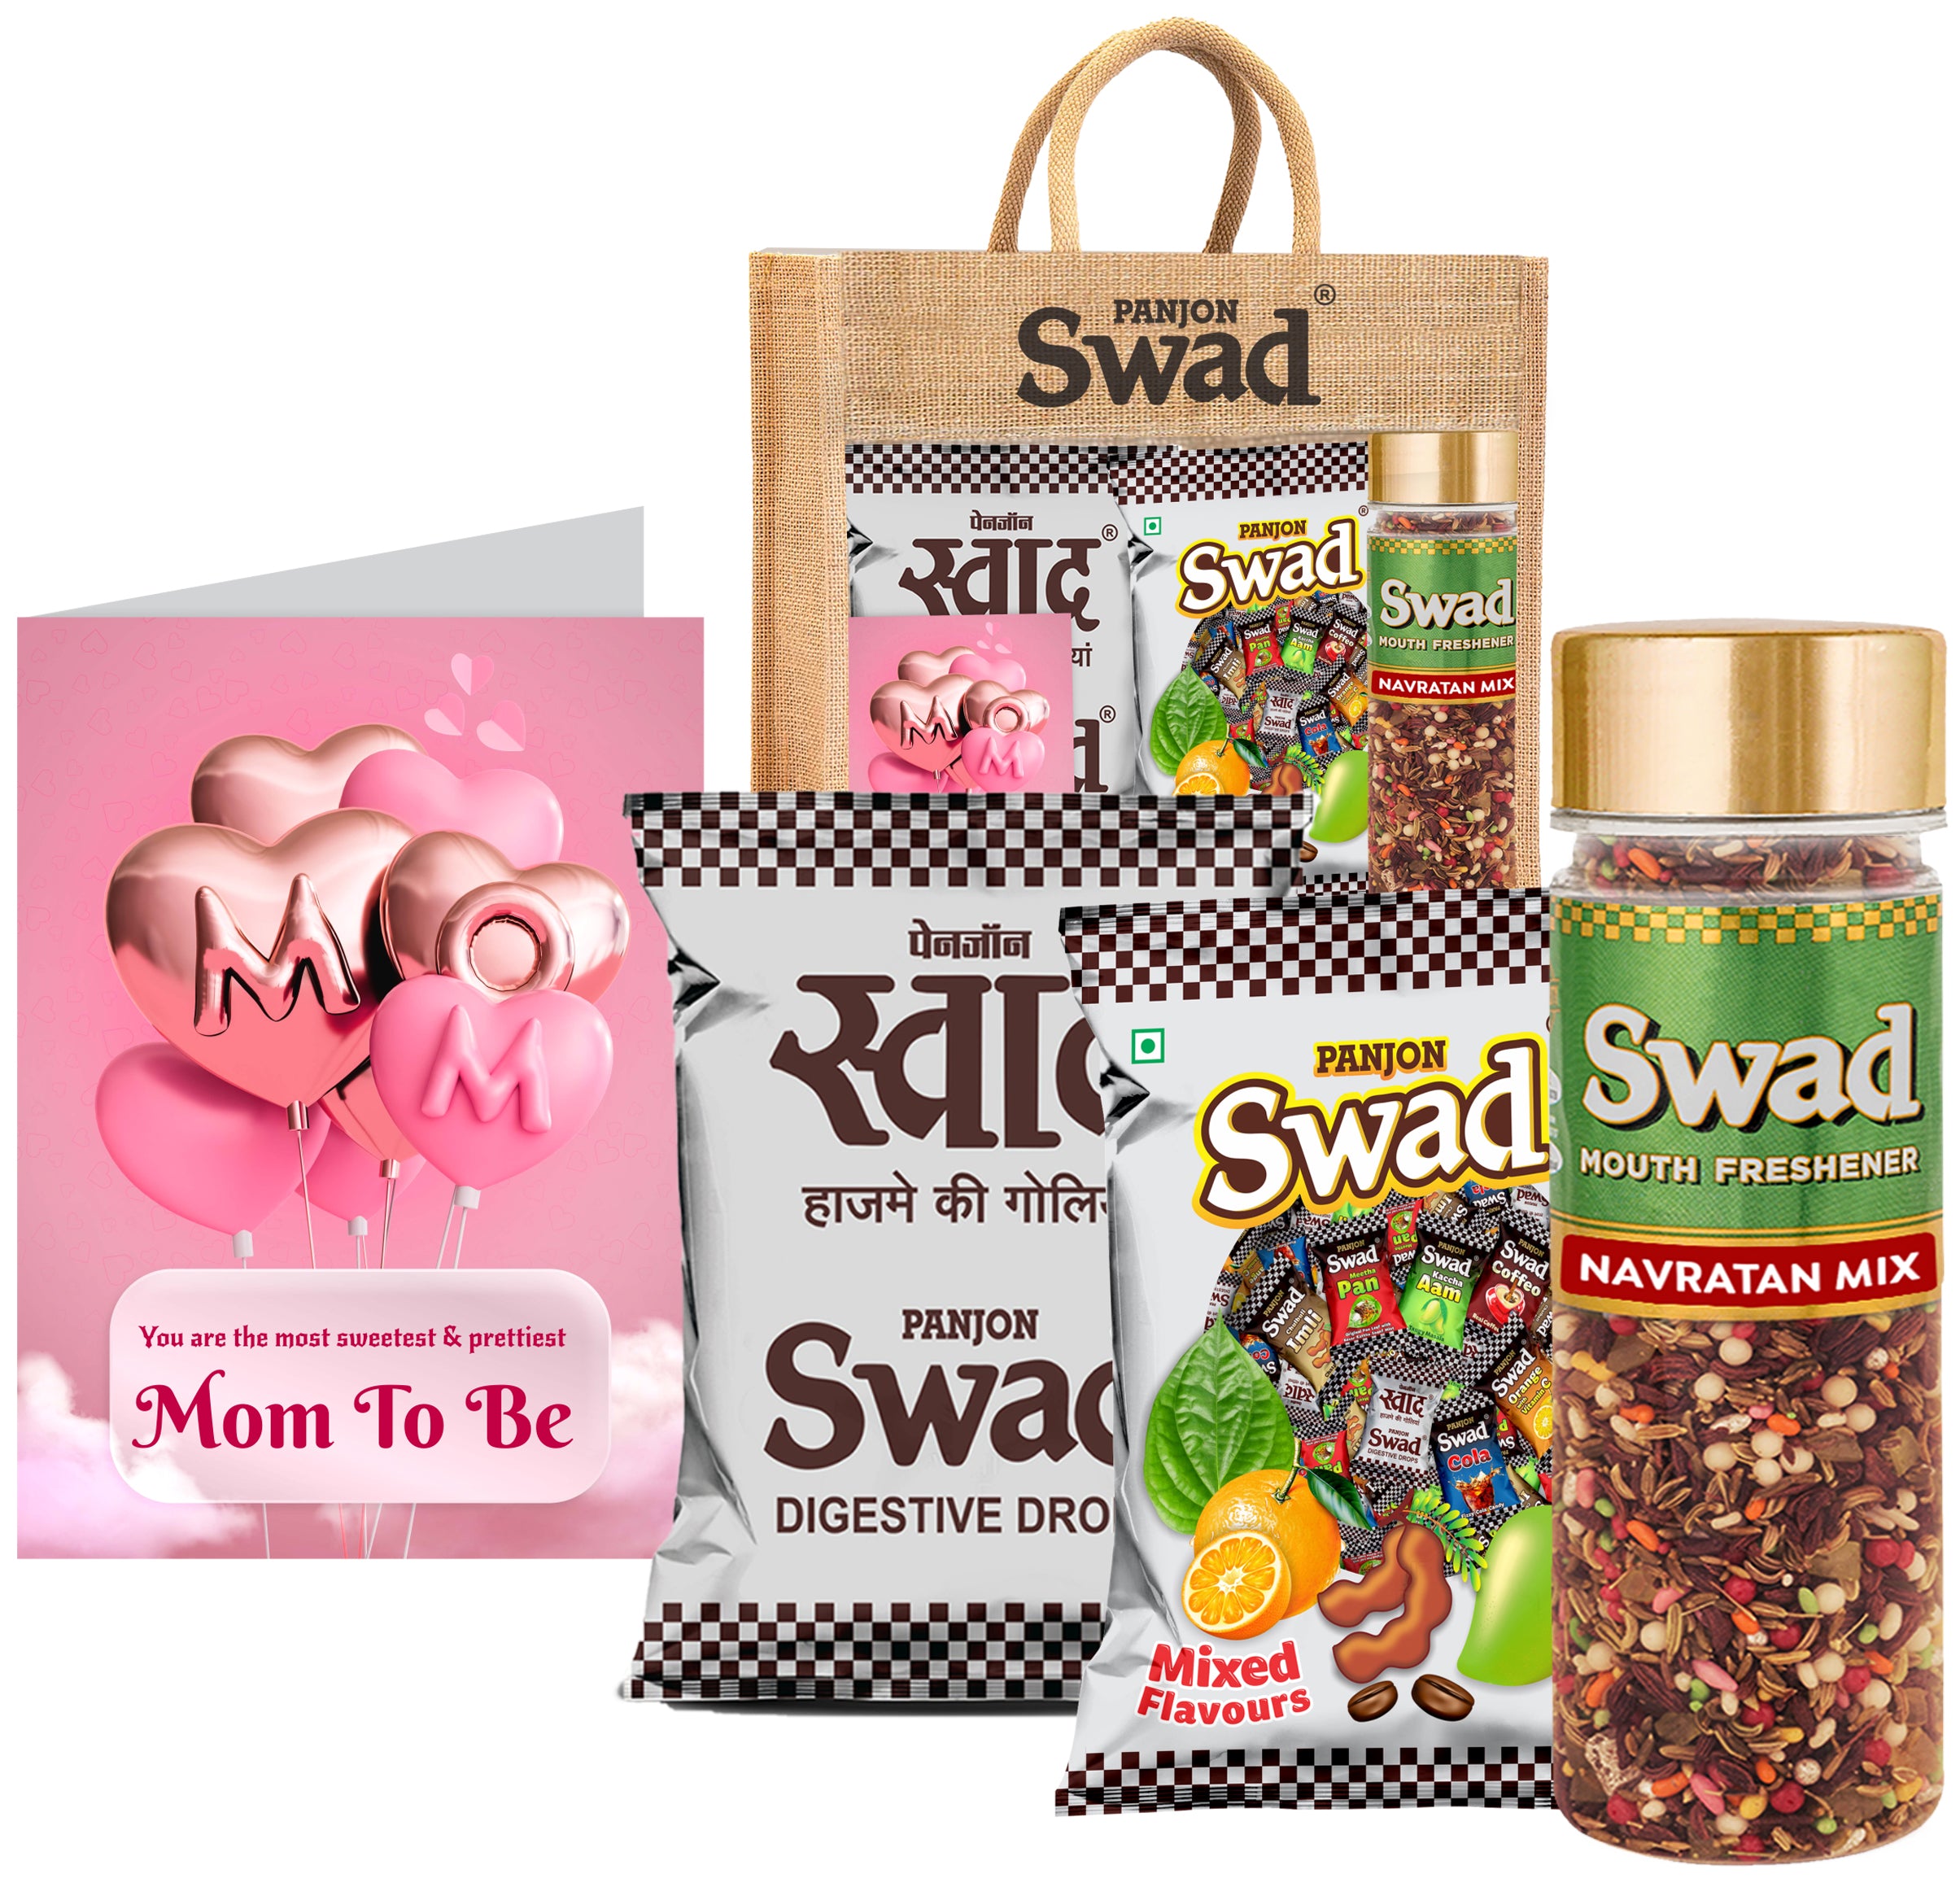 Swad Mom To Be/New Mother/pregnant Gift with Card (25 Swad Candy, 25 Mixed Toffee, Navratan Mix Mukhwas) in Jute Bag